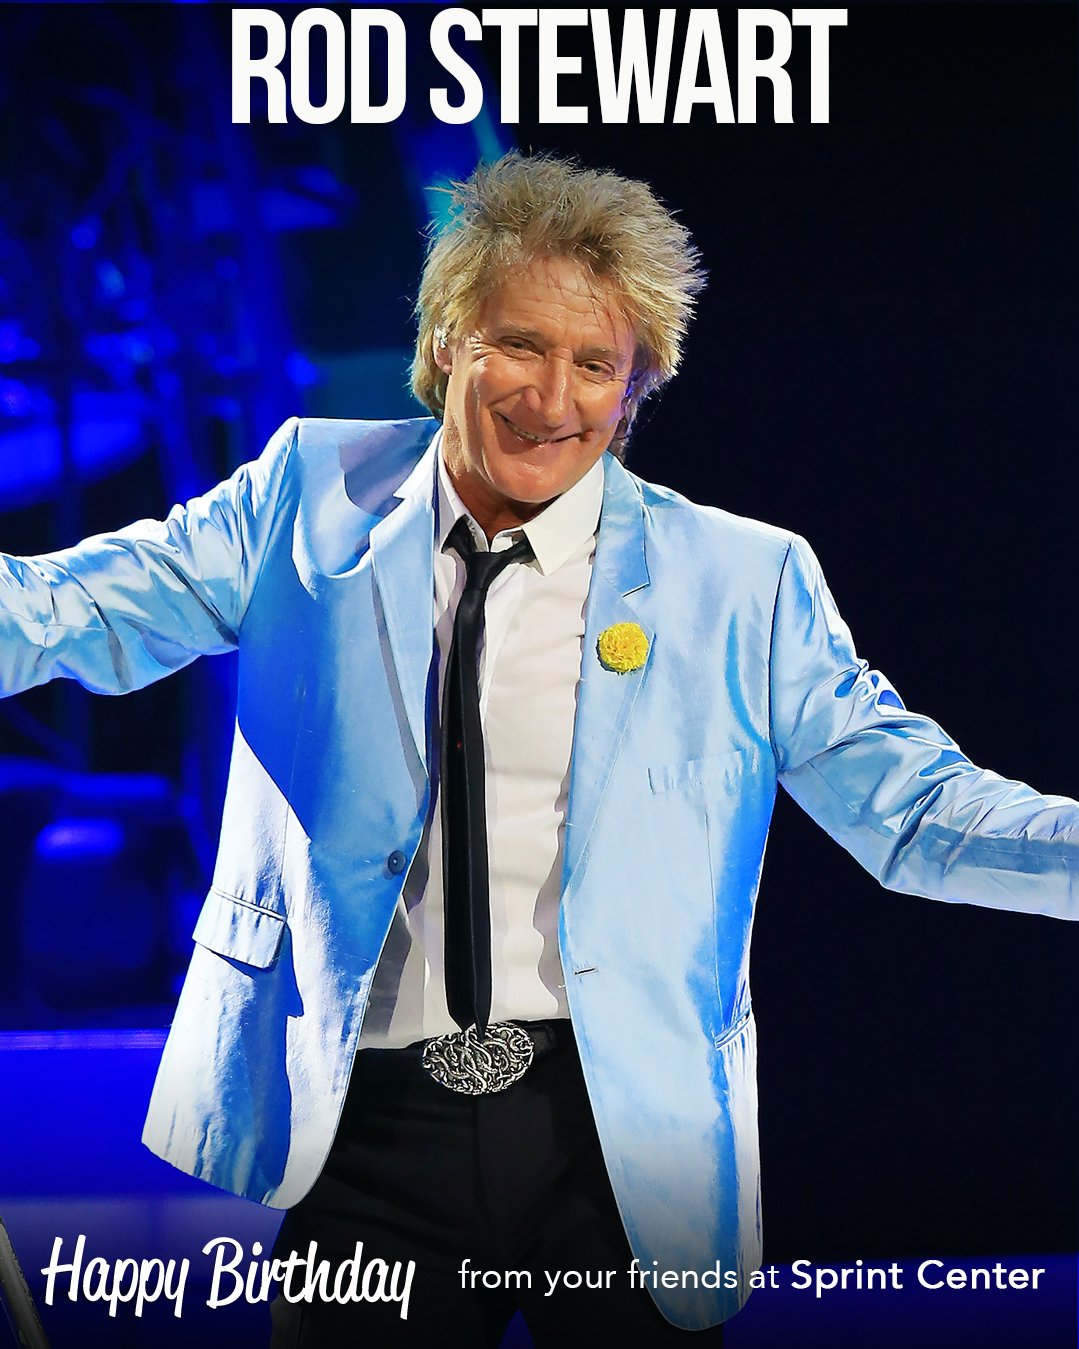 Happy Birthday, Rod Stewart! We will see you at Sprint Center on Aug. 14.  